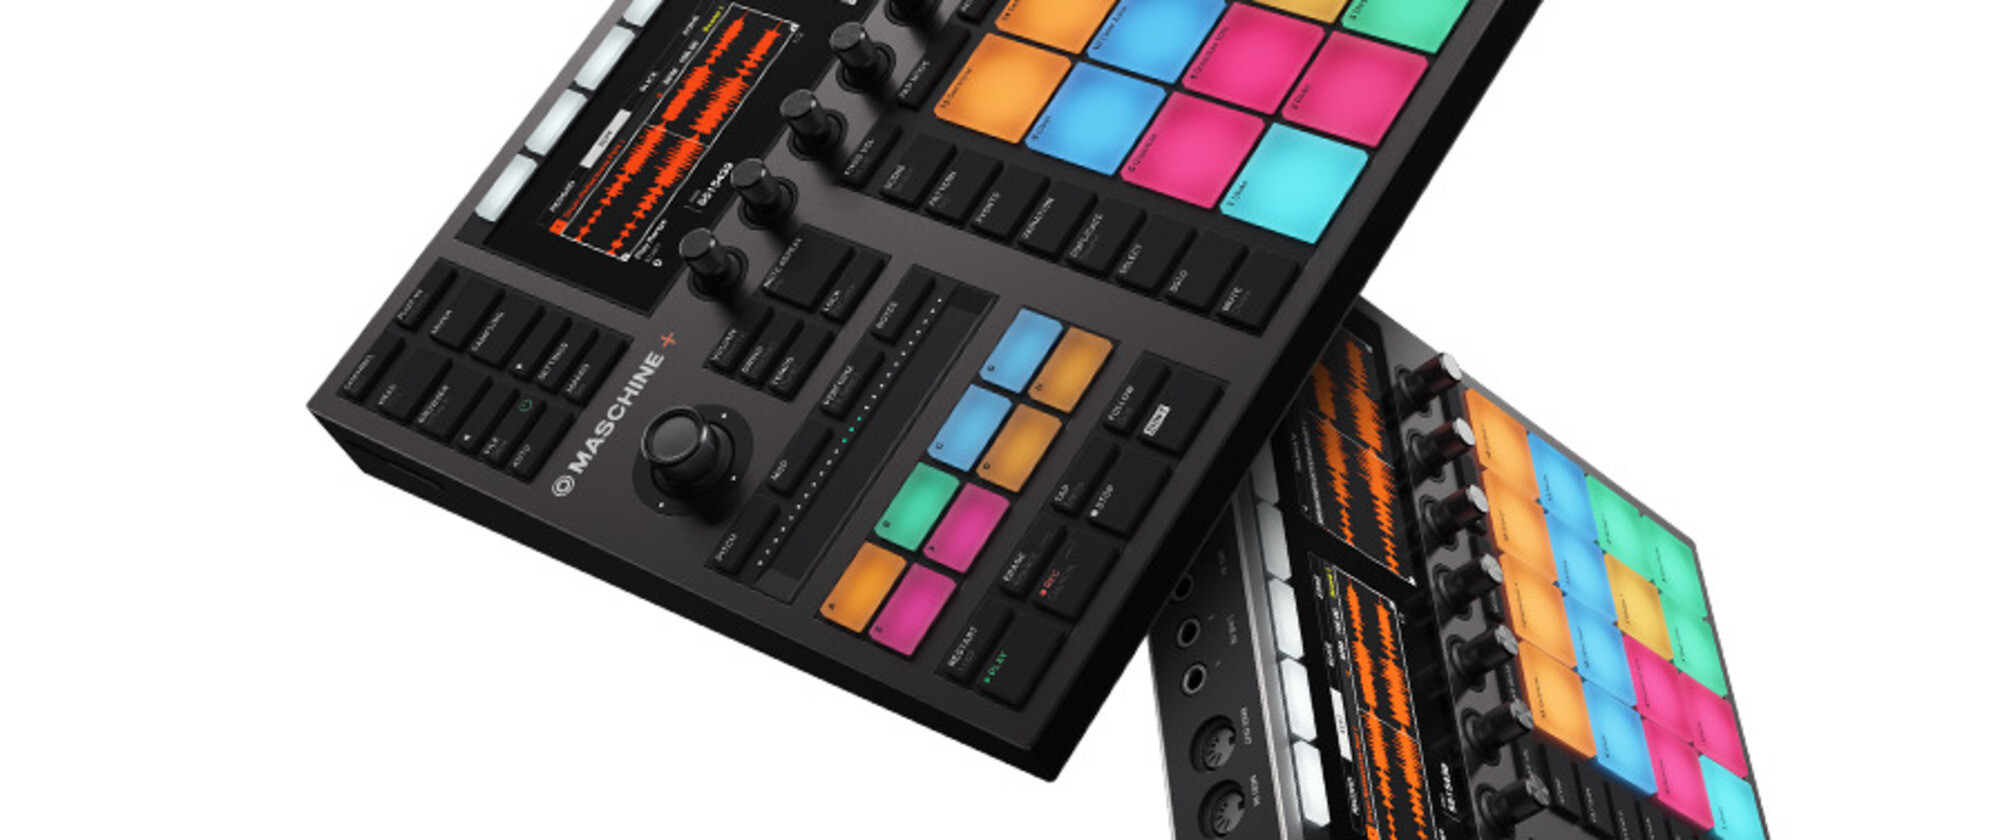 Native Instruments Reveal New Standalone Maschine+. A Maschine with No strings attached!